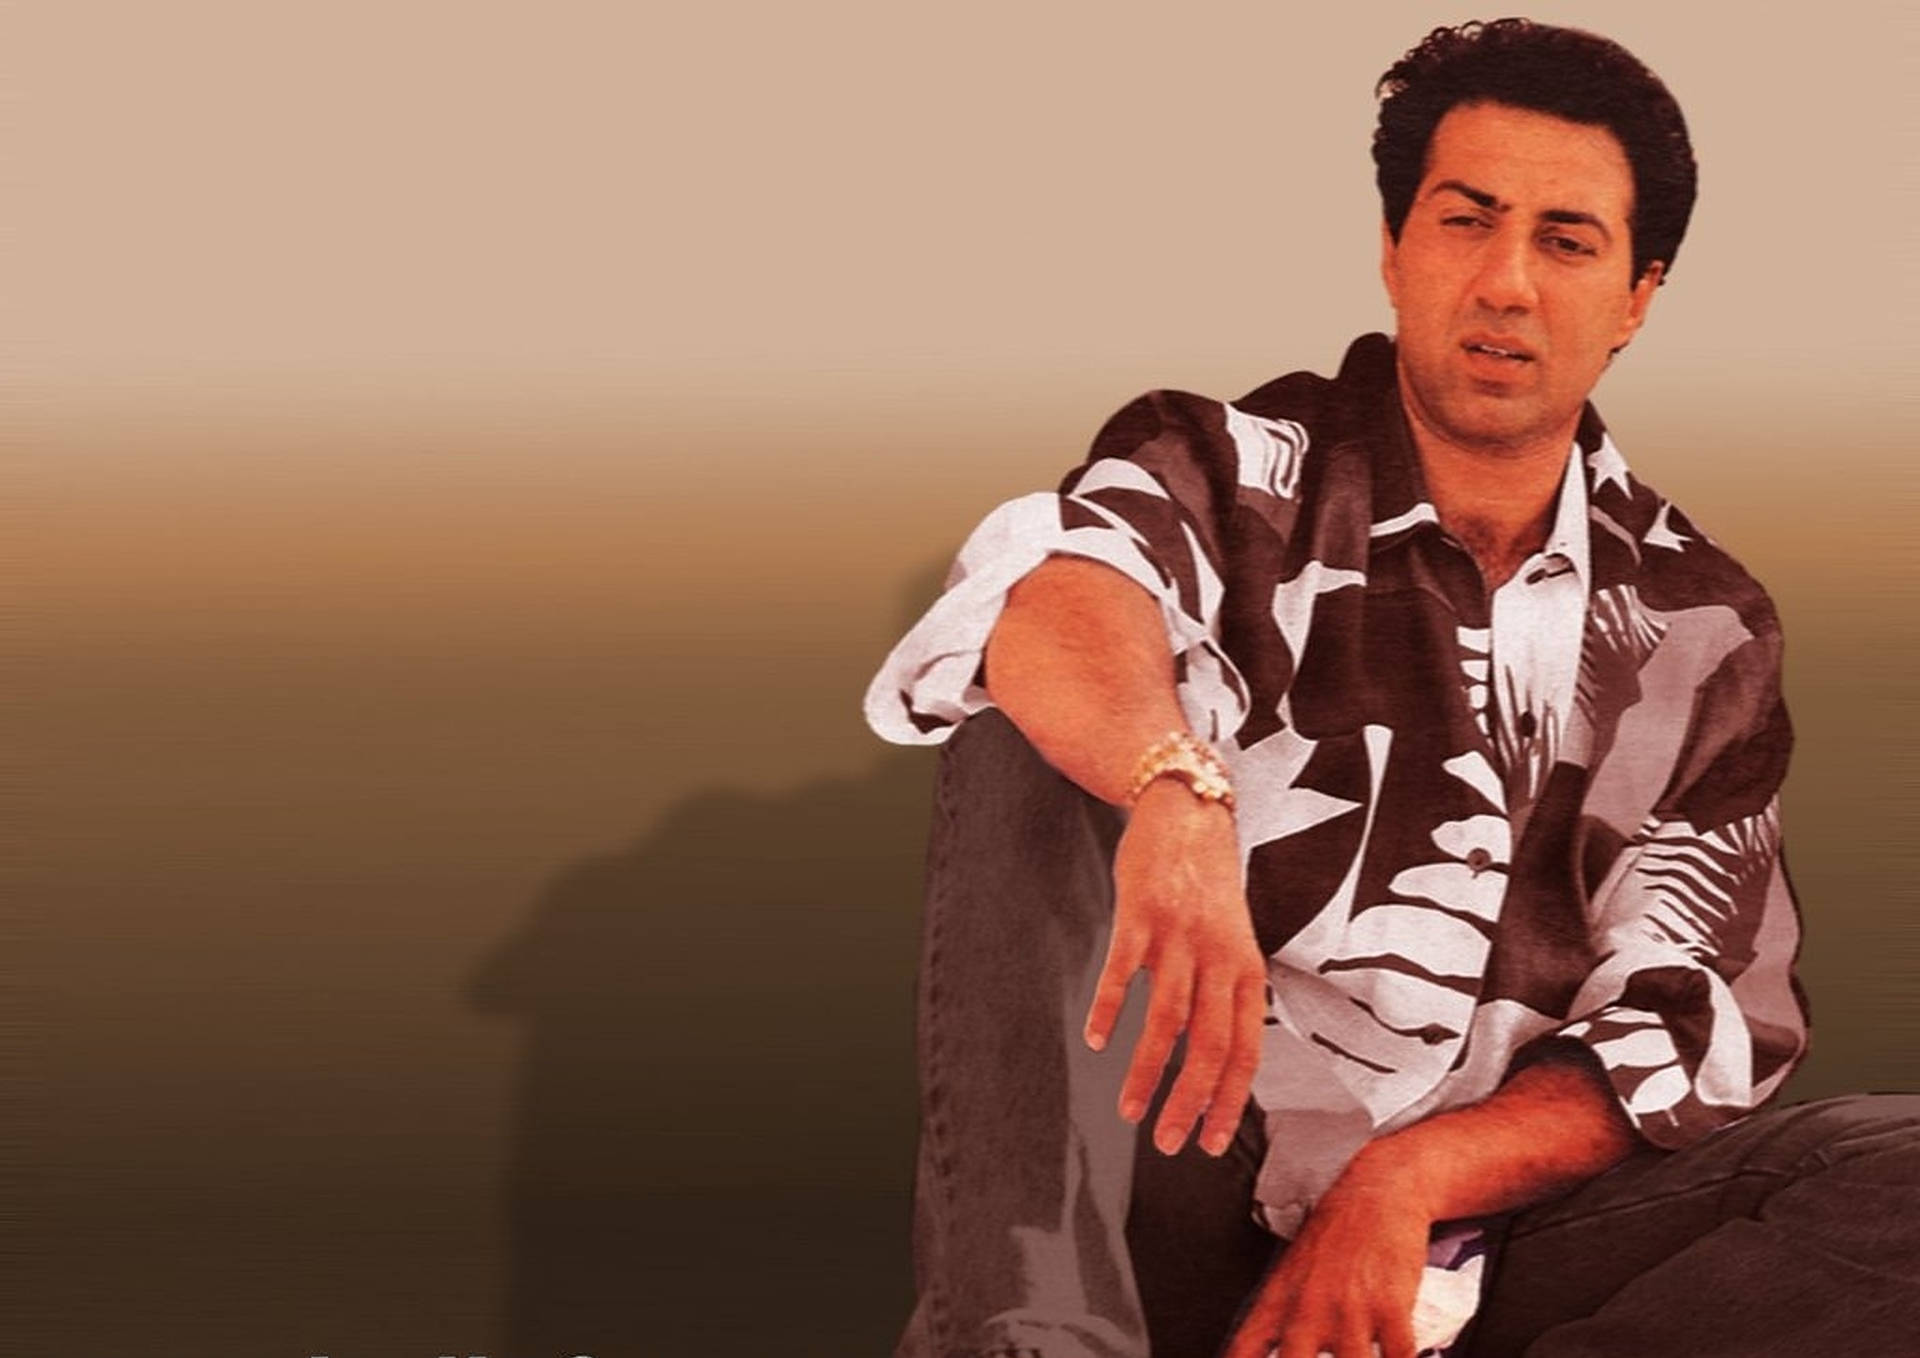 Free Sunny Deol Wallpaper Downloads, [100+] Sunny Deol Wallpapers for FREE  